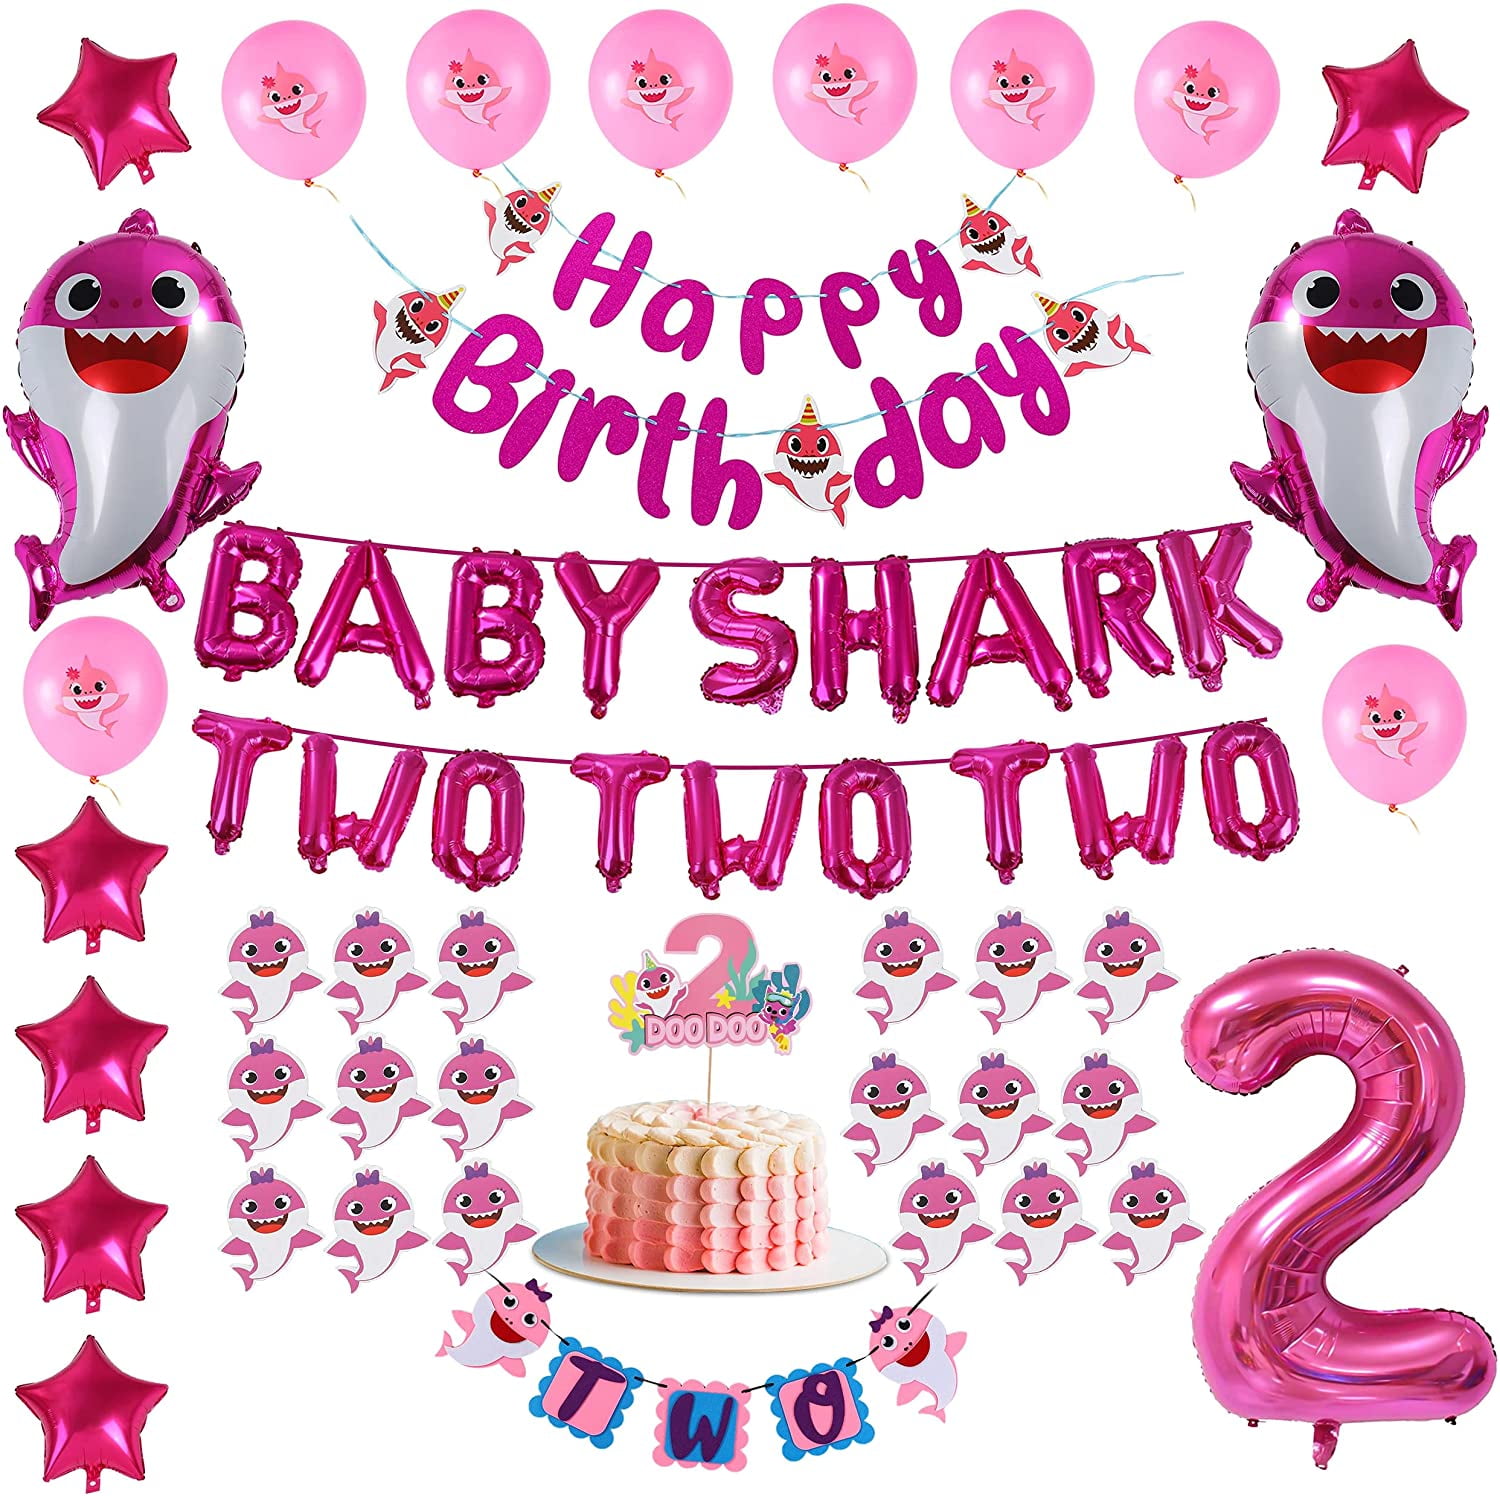 Blue Pink Green 36" x 12" Personalized Baby Shark Birthday Party Banner